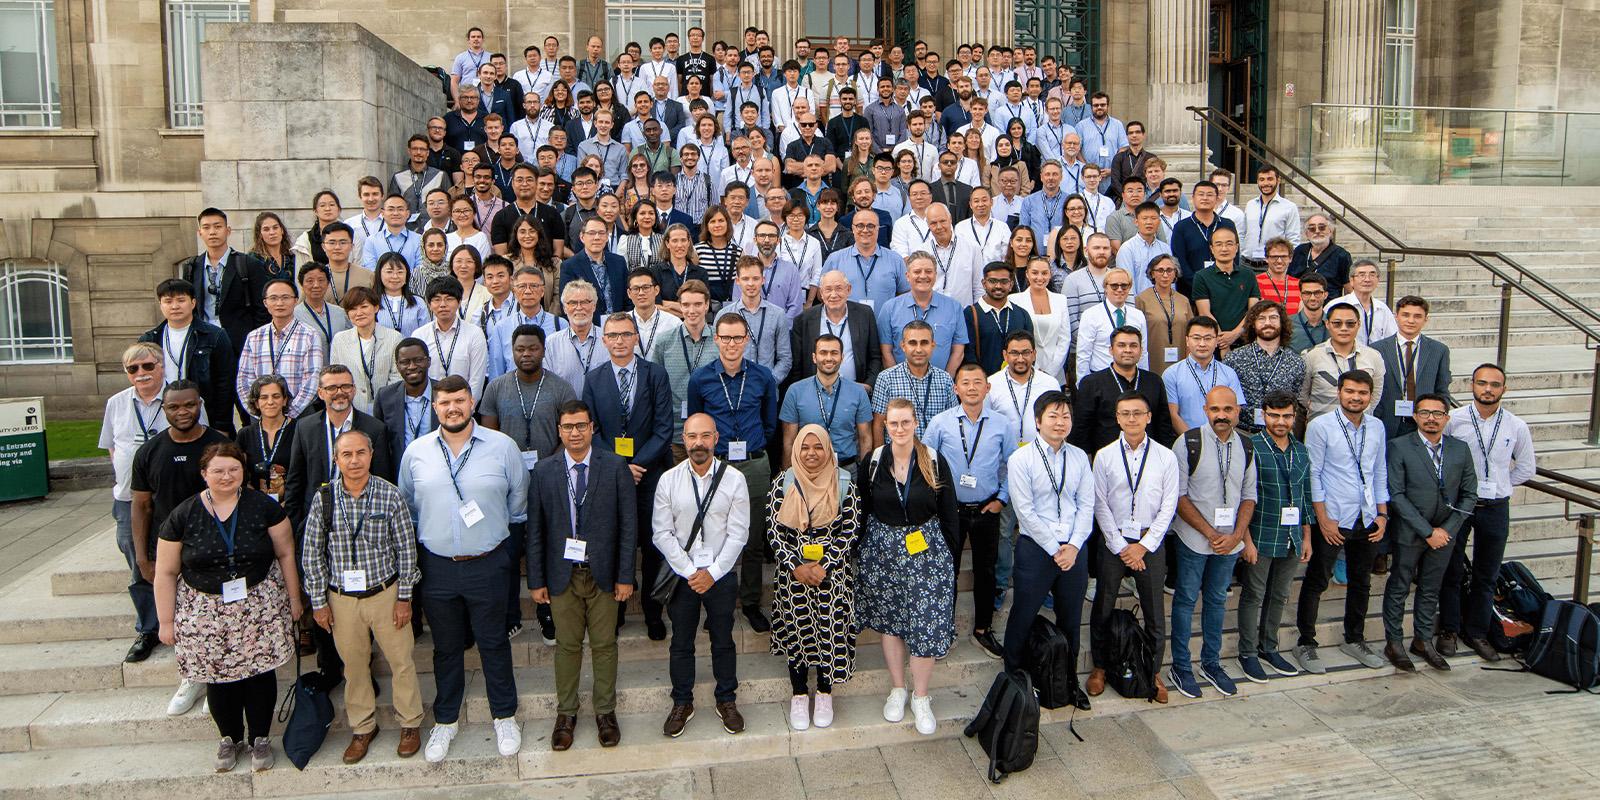 Leeds-Lyon Symposium on Tribology proves another resounding success